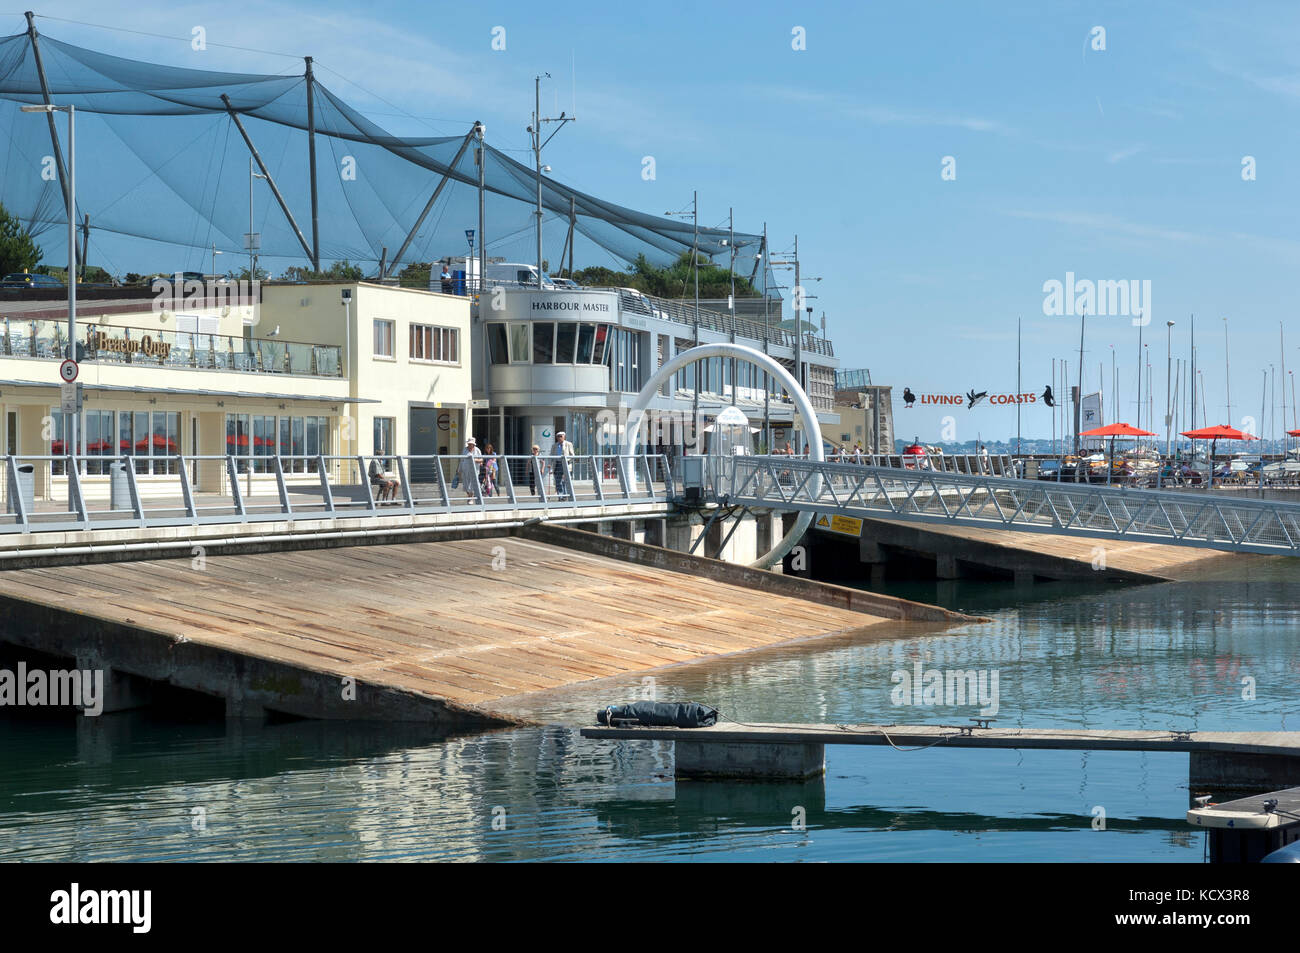 WWII Landing stages at Beacon Quay, Torquay. Constructed for the embarkation of American troops for Operation Overlord - the Battle of Normandy Stock Photo